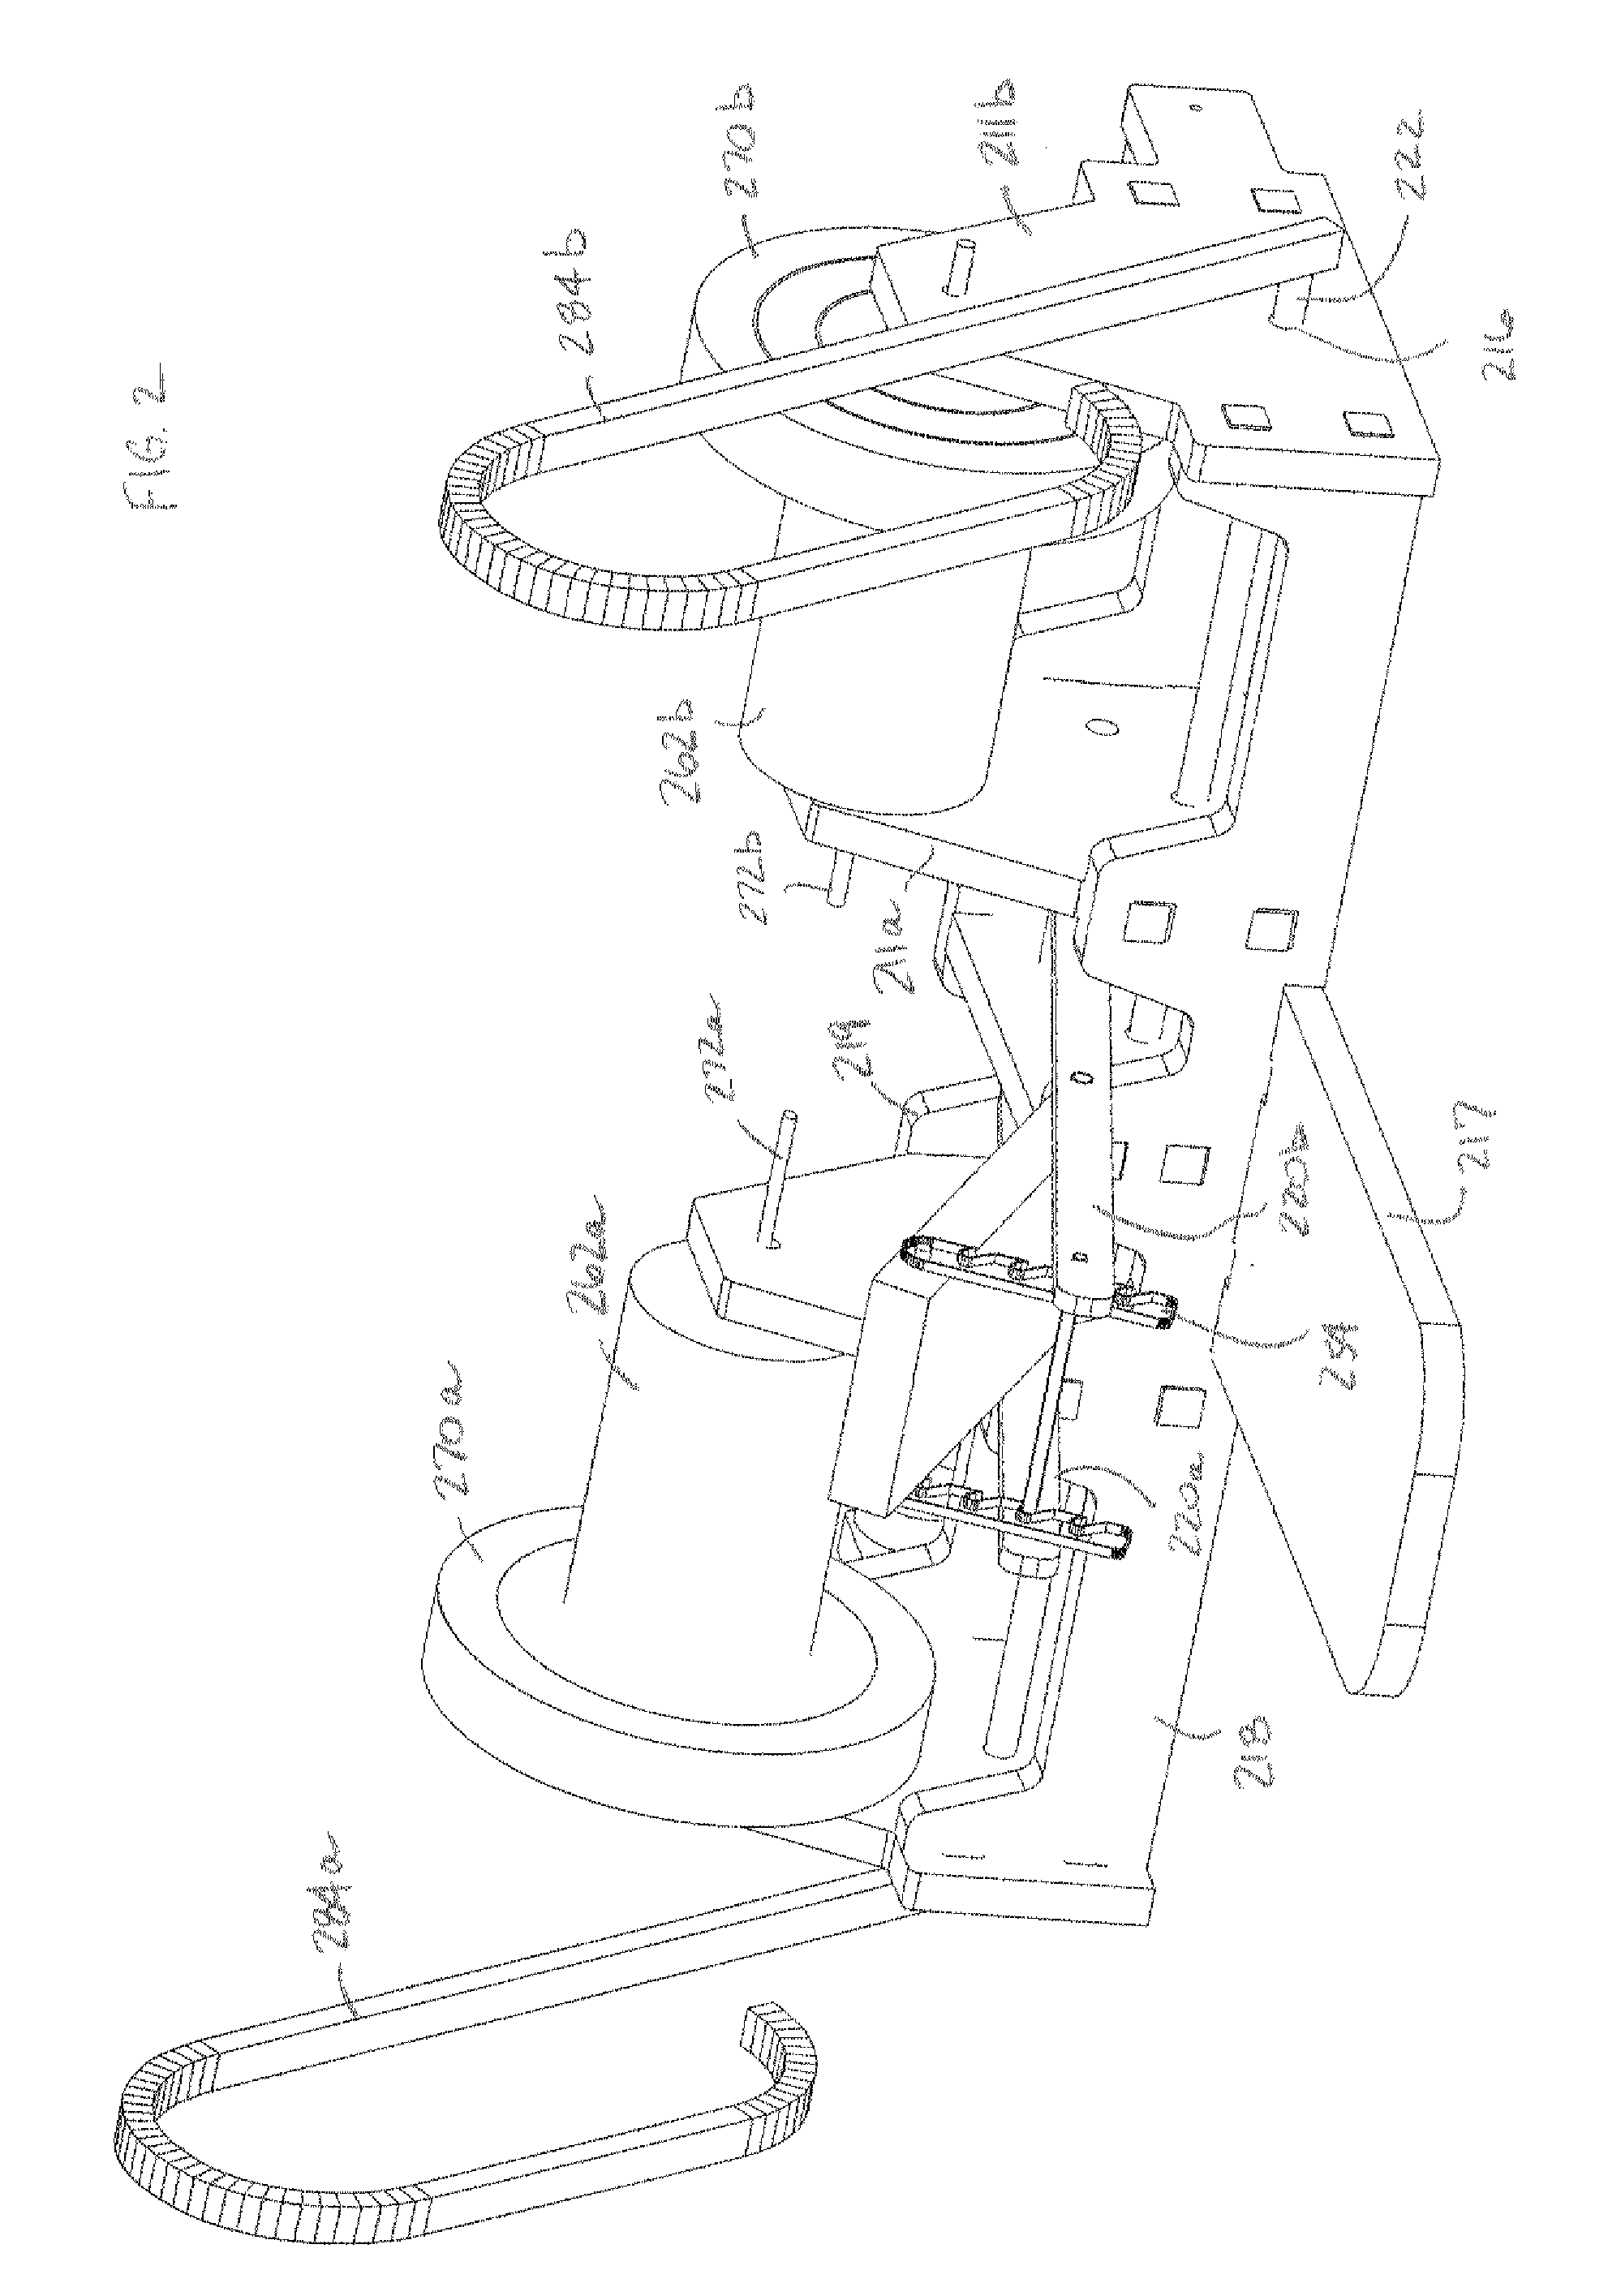 Apparatus and method for wheelchair aerobic stationary exercise